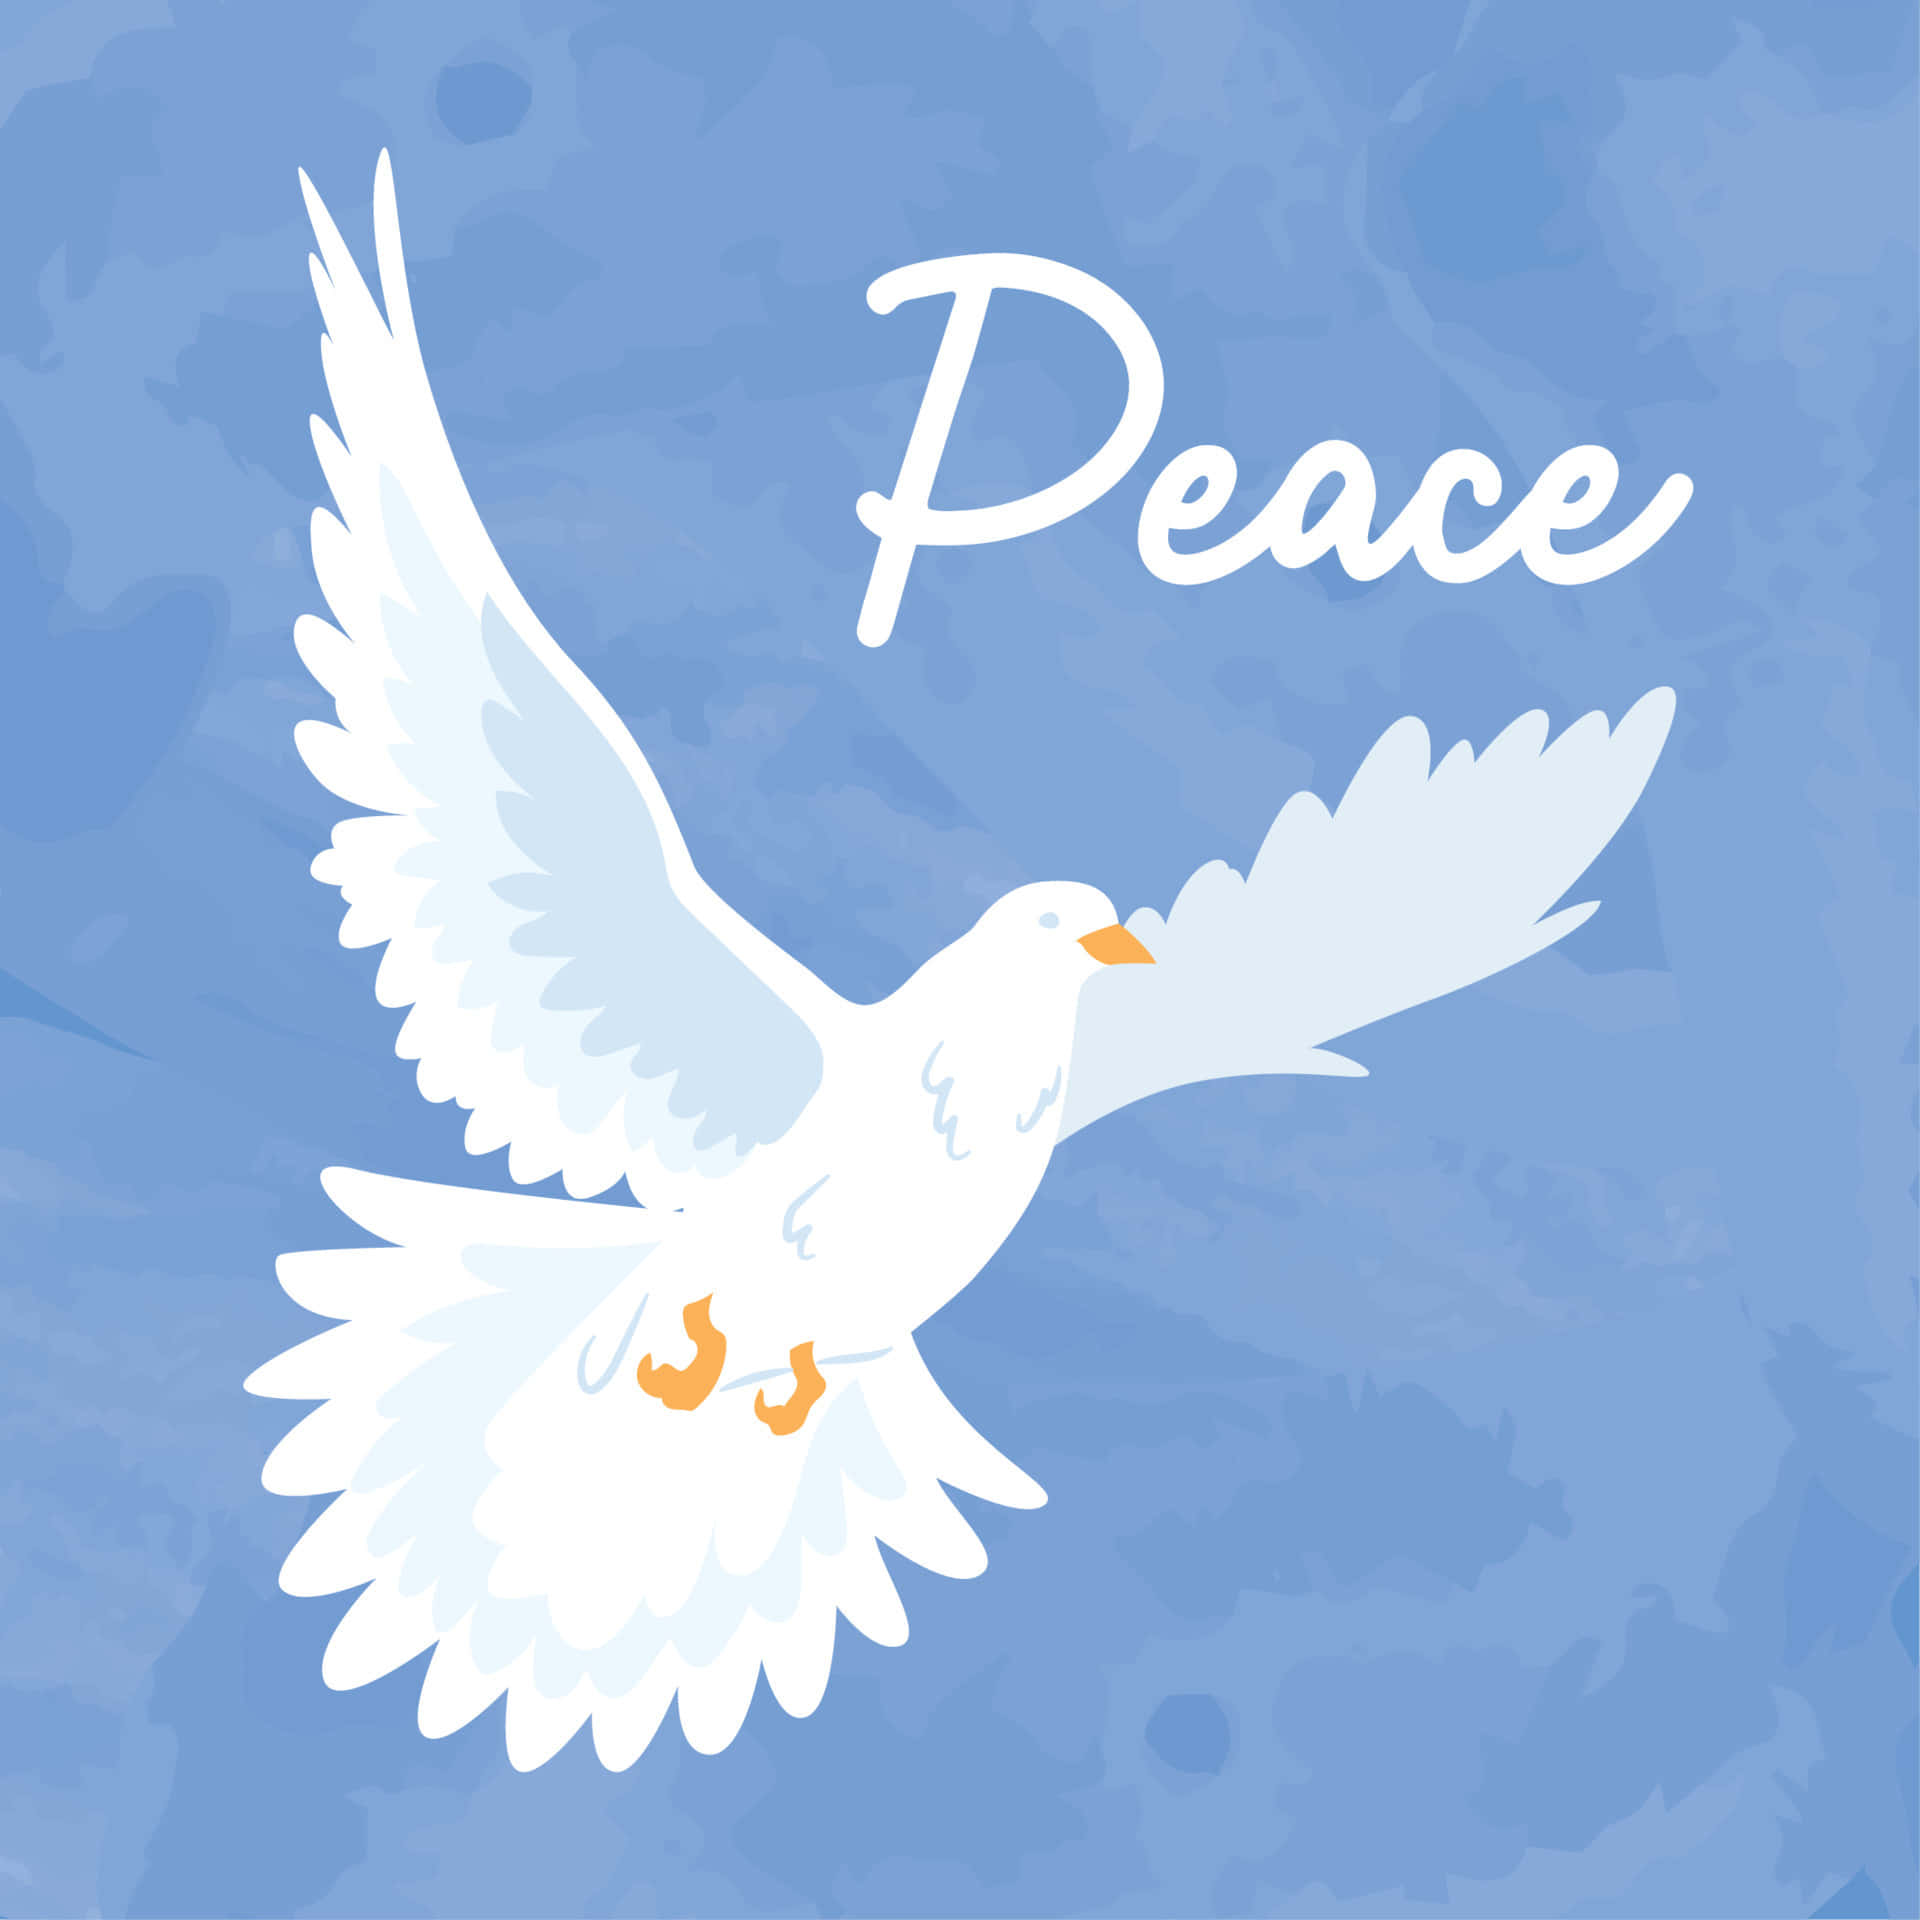 Spread the message of peace around the world